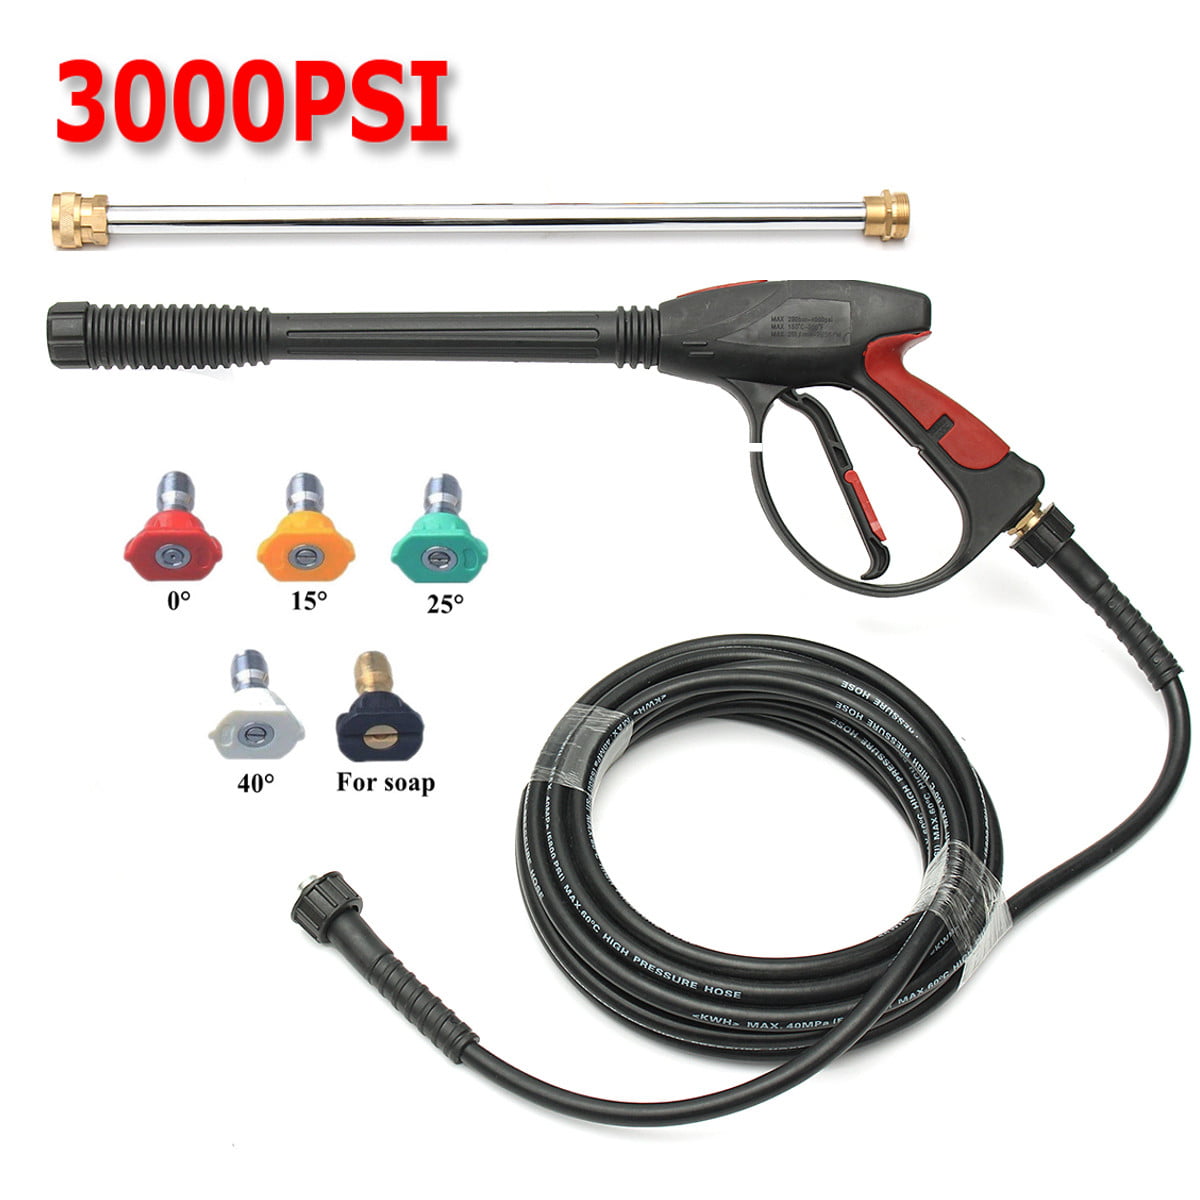 3000PSI High Pressure Washer Wand Gun Turbo Spray Nozzle Hose For Car Clean 